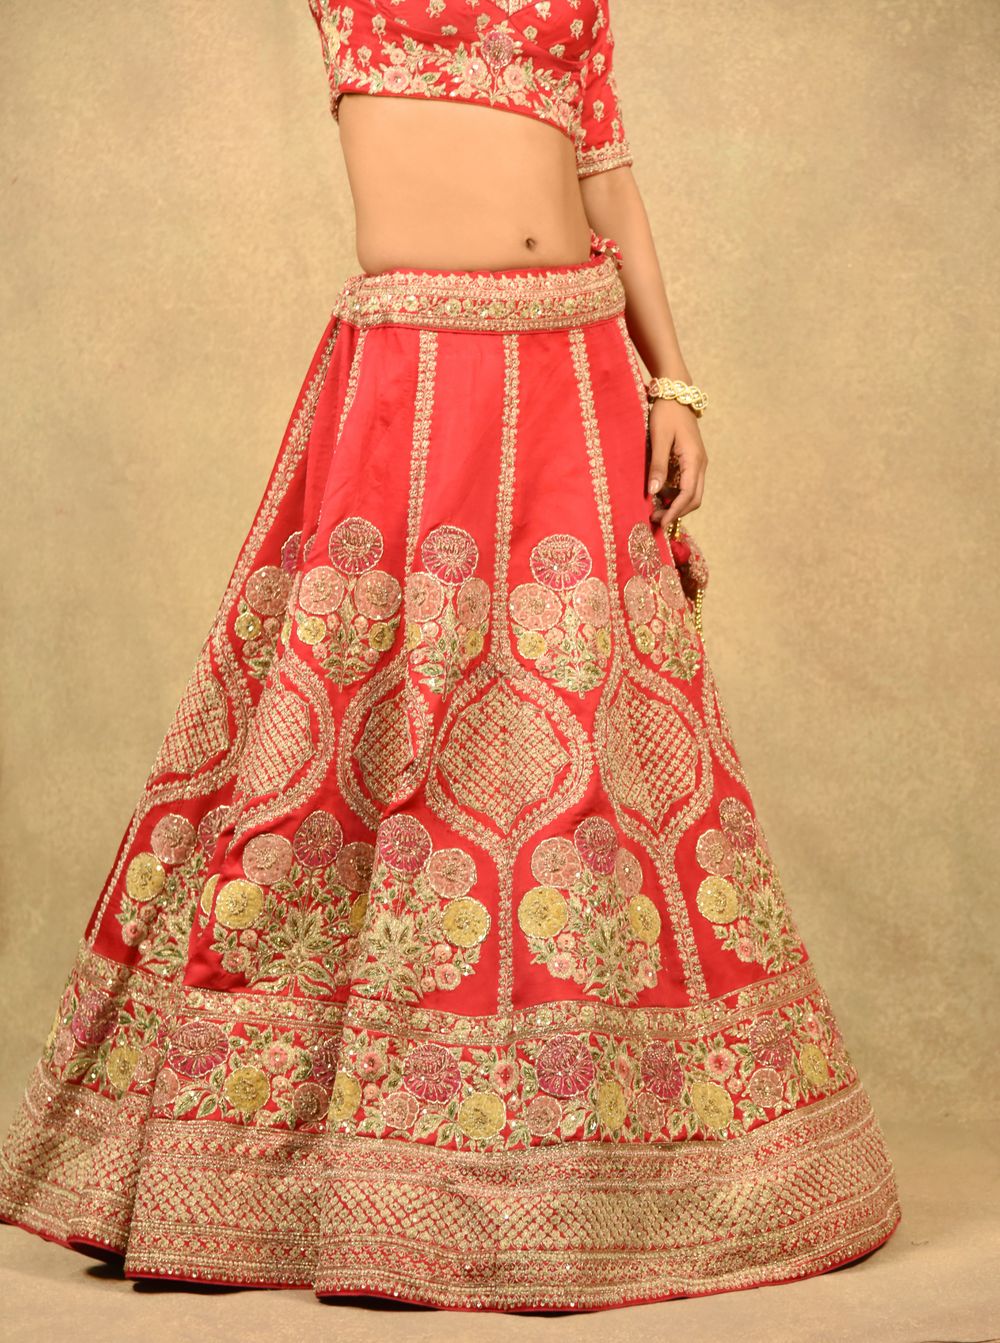 Photo From our new collection - By Kala Shree Regalia